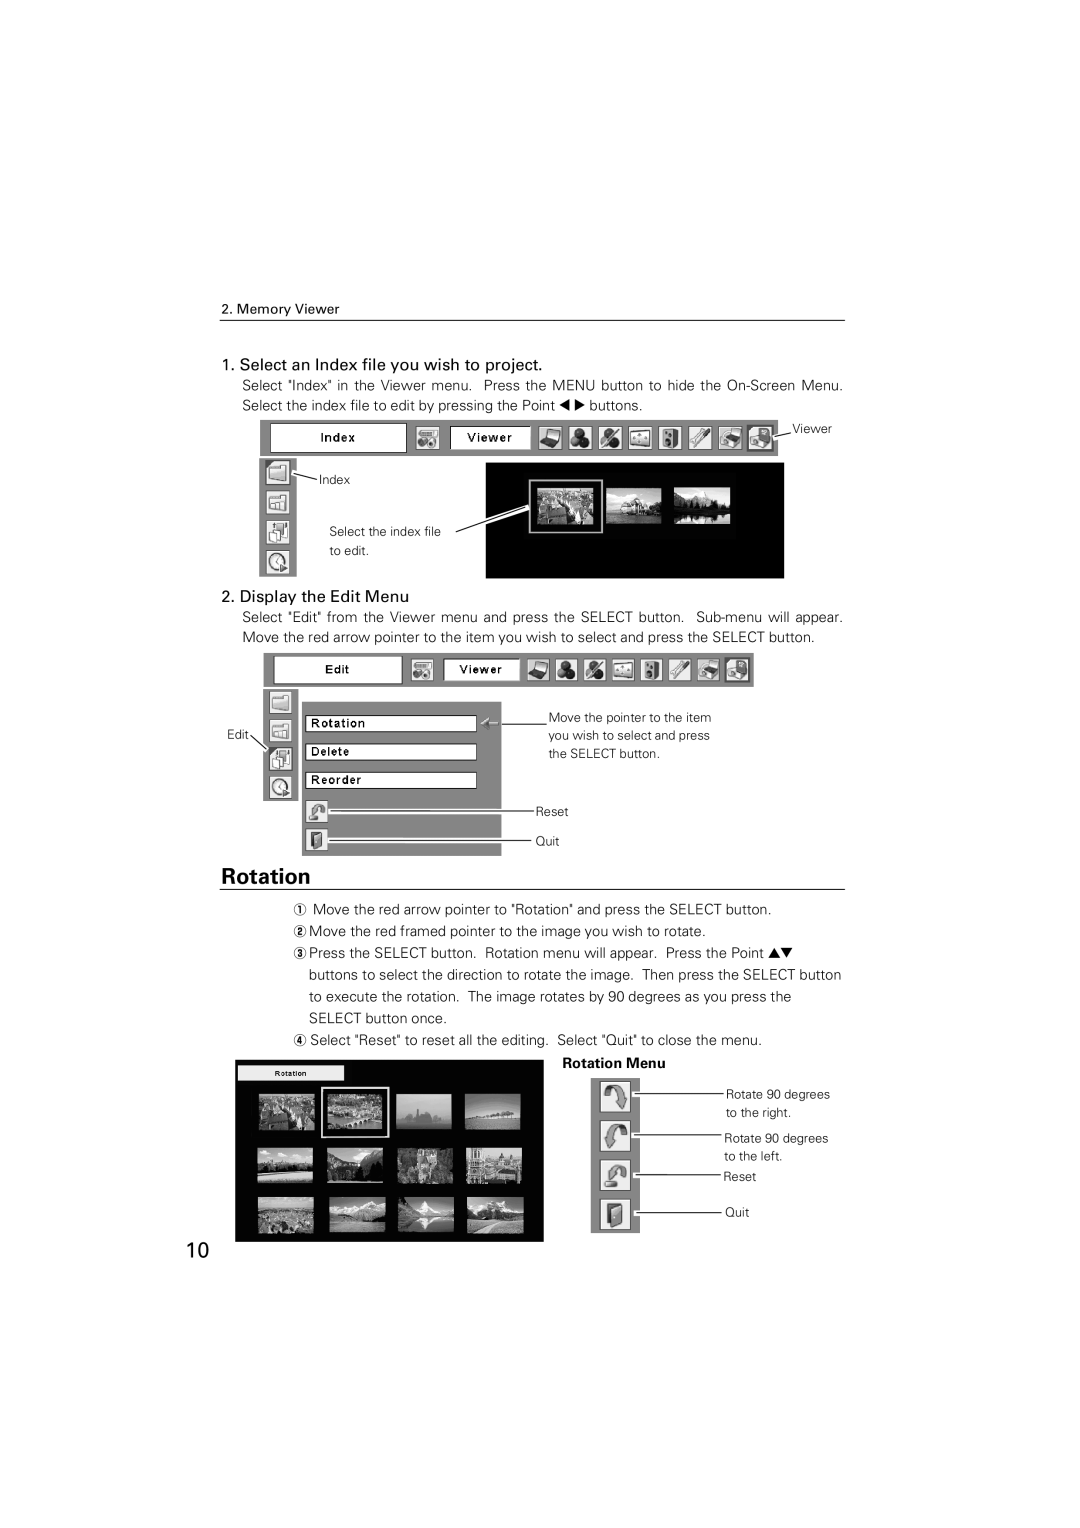 Sanyo POA-USB02 owner manual Rotation, Select an Index file you wish to project, Display the Edit Menu 